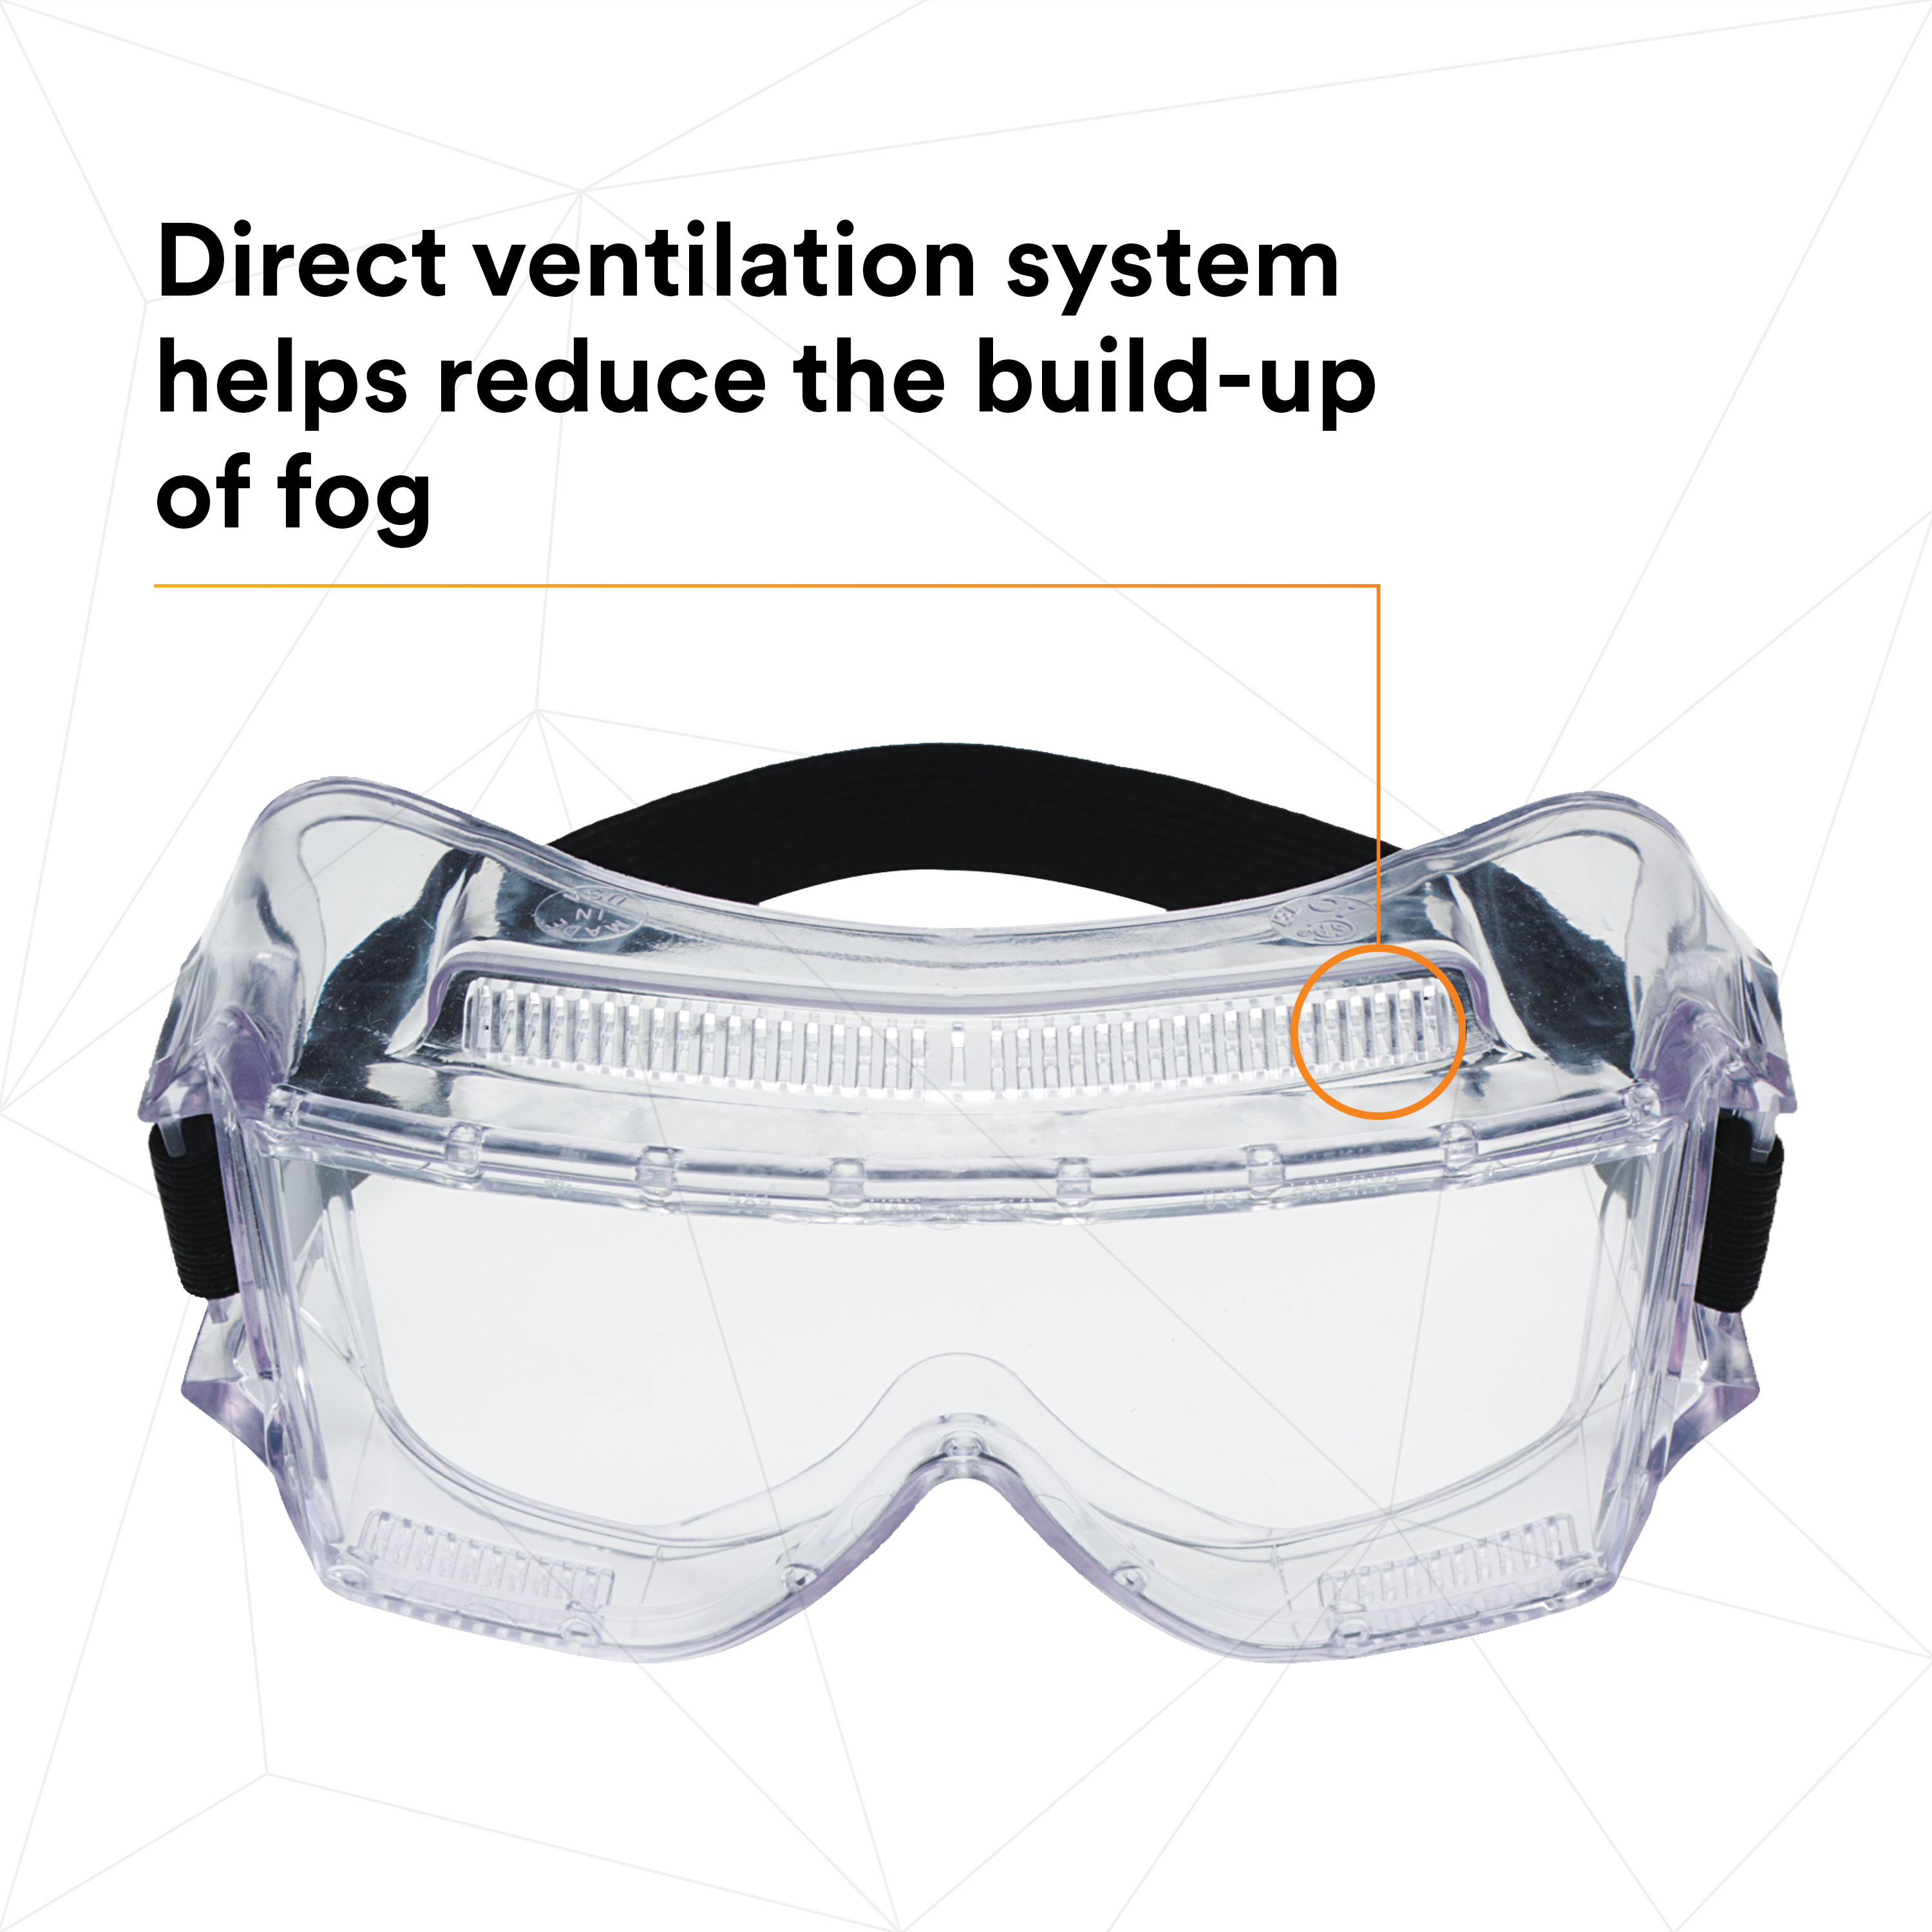 3M™ Centurion™ Impact Safety Goggles 452 40300-00000-10, Clear Lens, 10 ea/Case